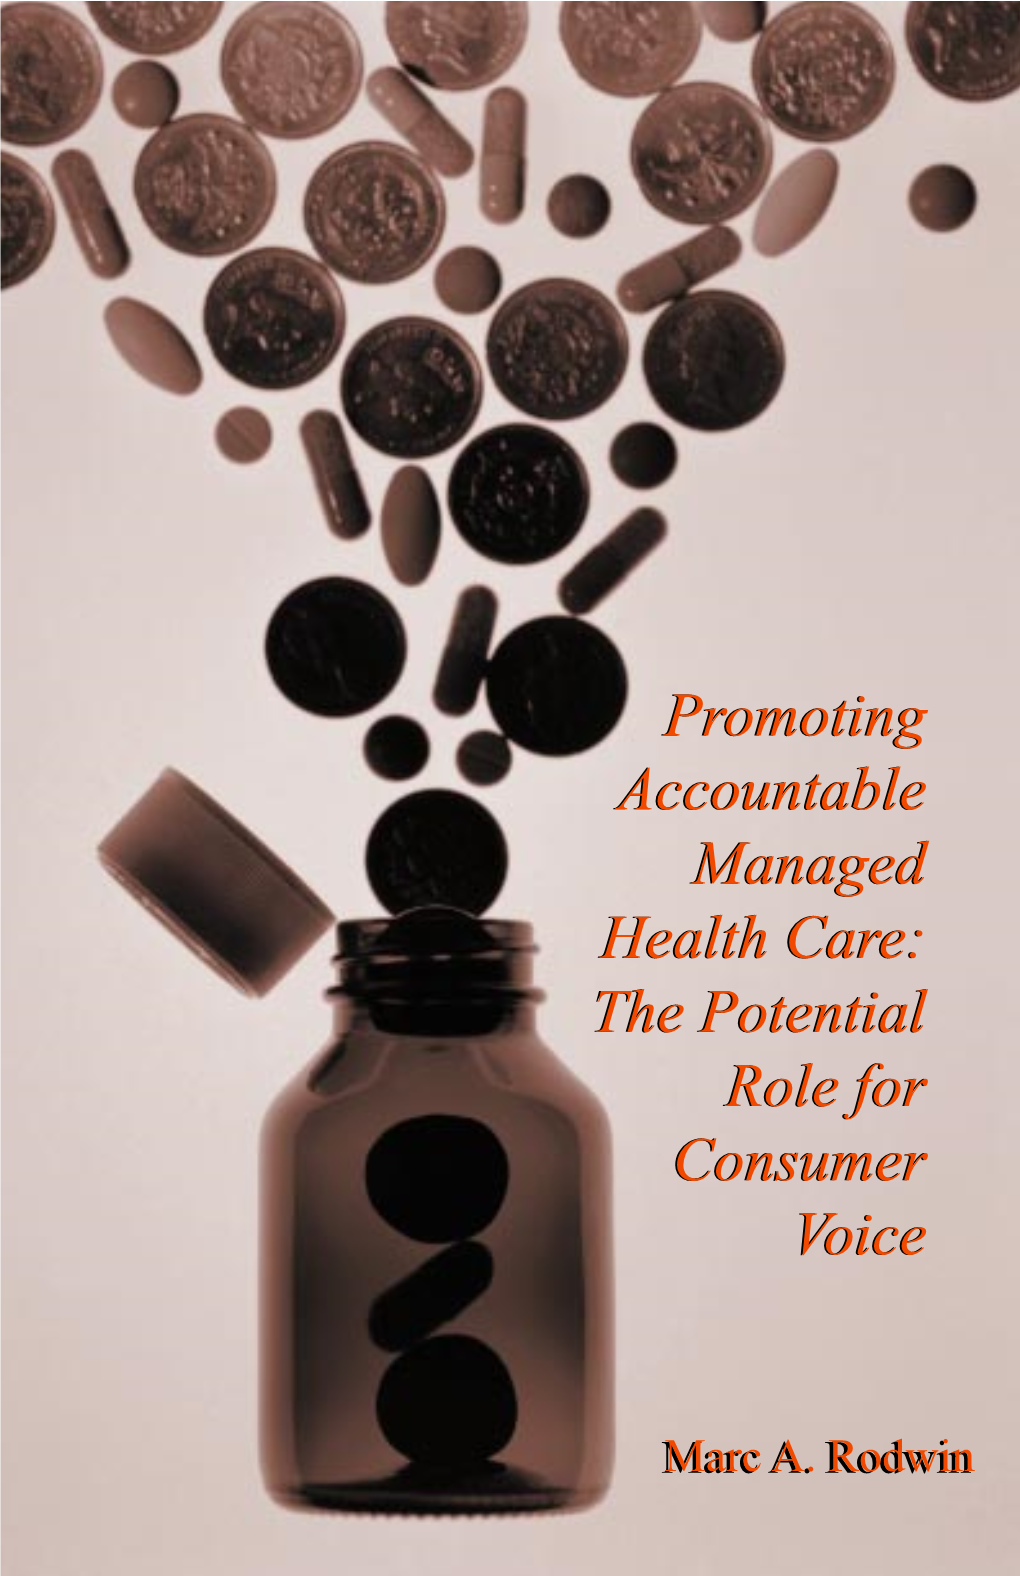 The Potential Role for Consumer Voice Promoting Accountable